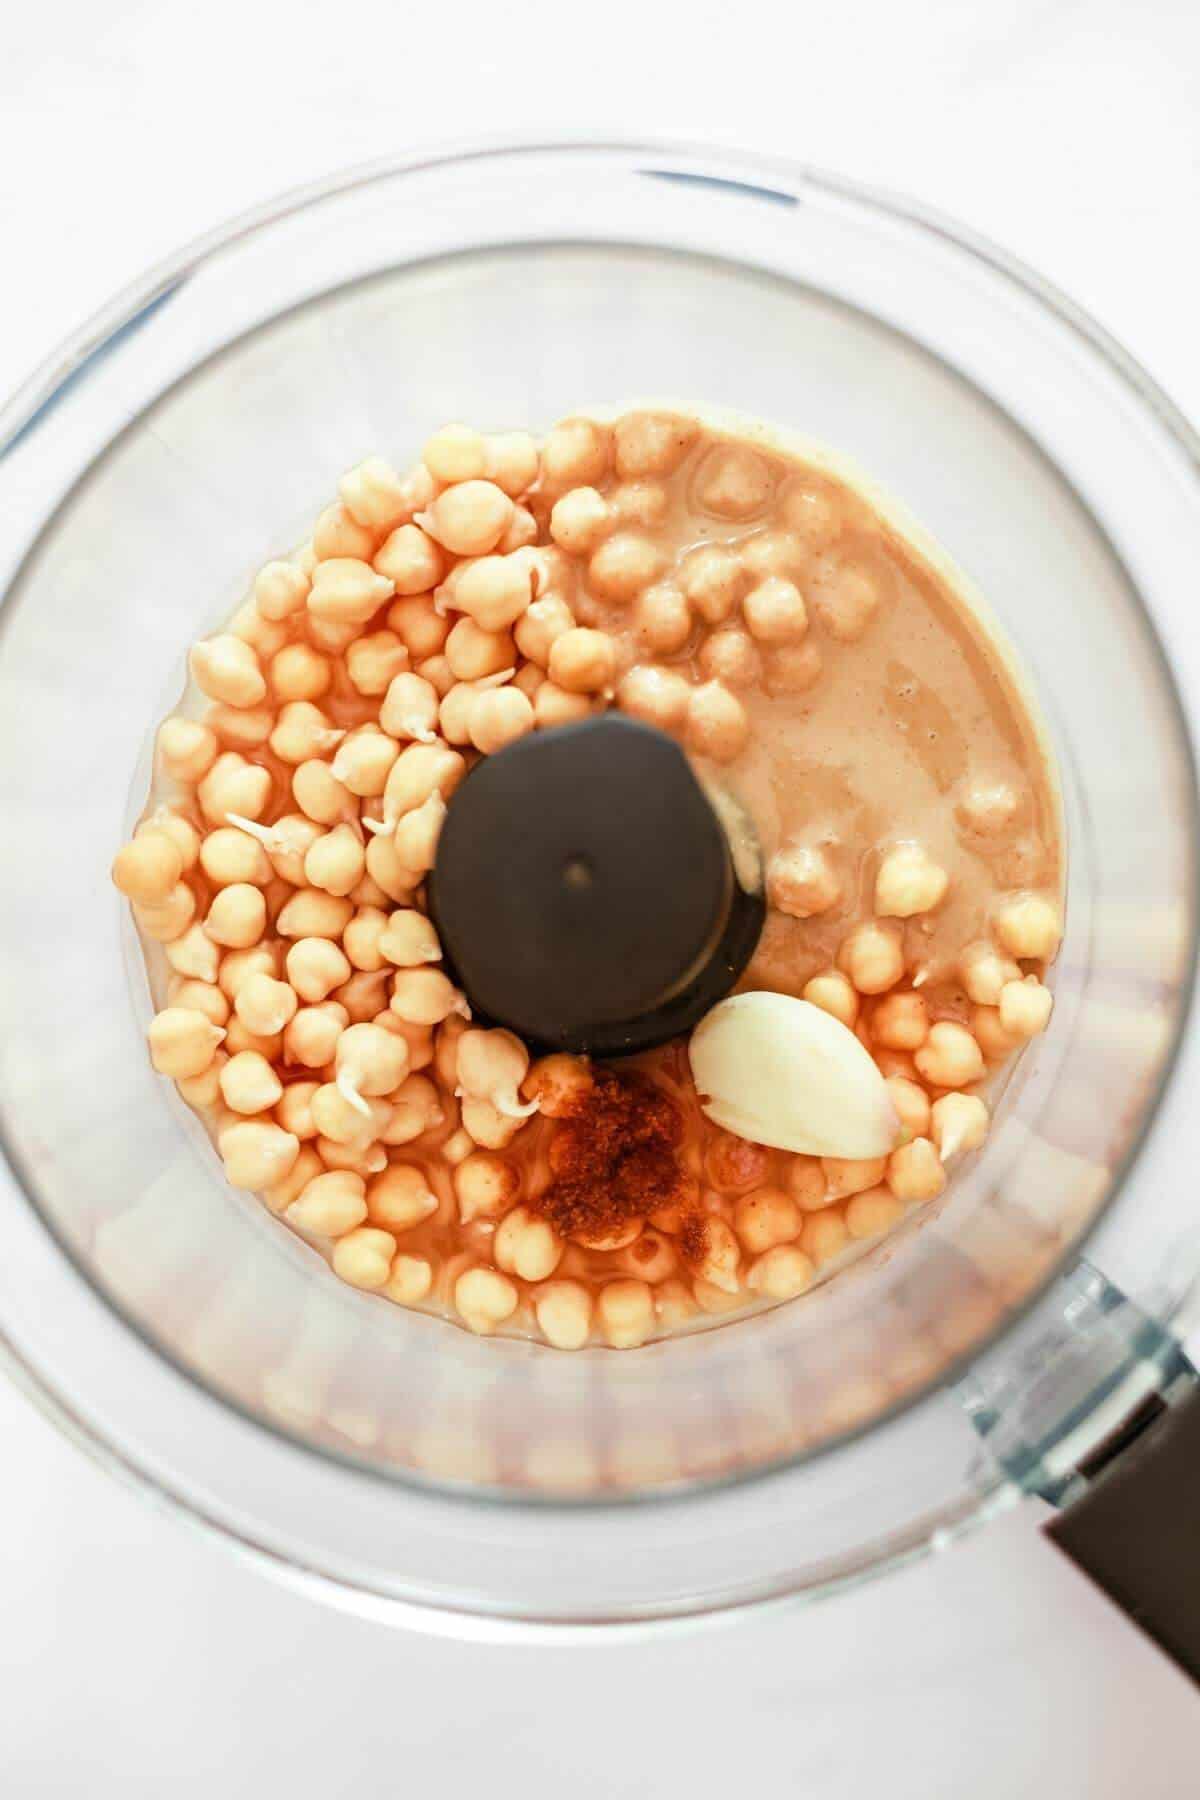 Top down view of a blender containing chickpeas, a garlic clove and some spice.